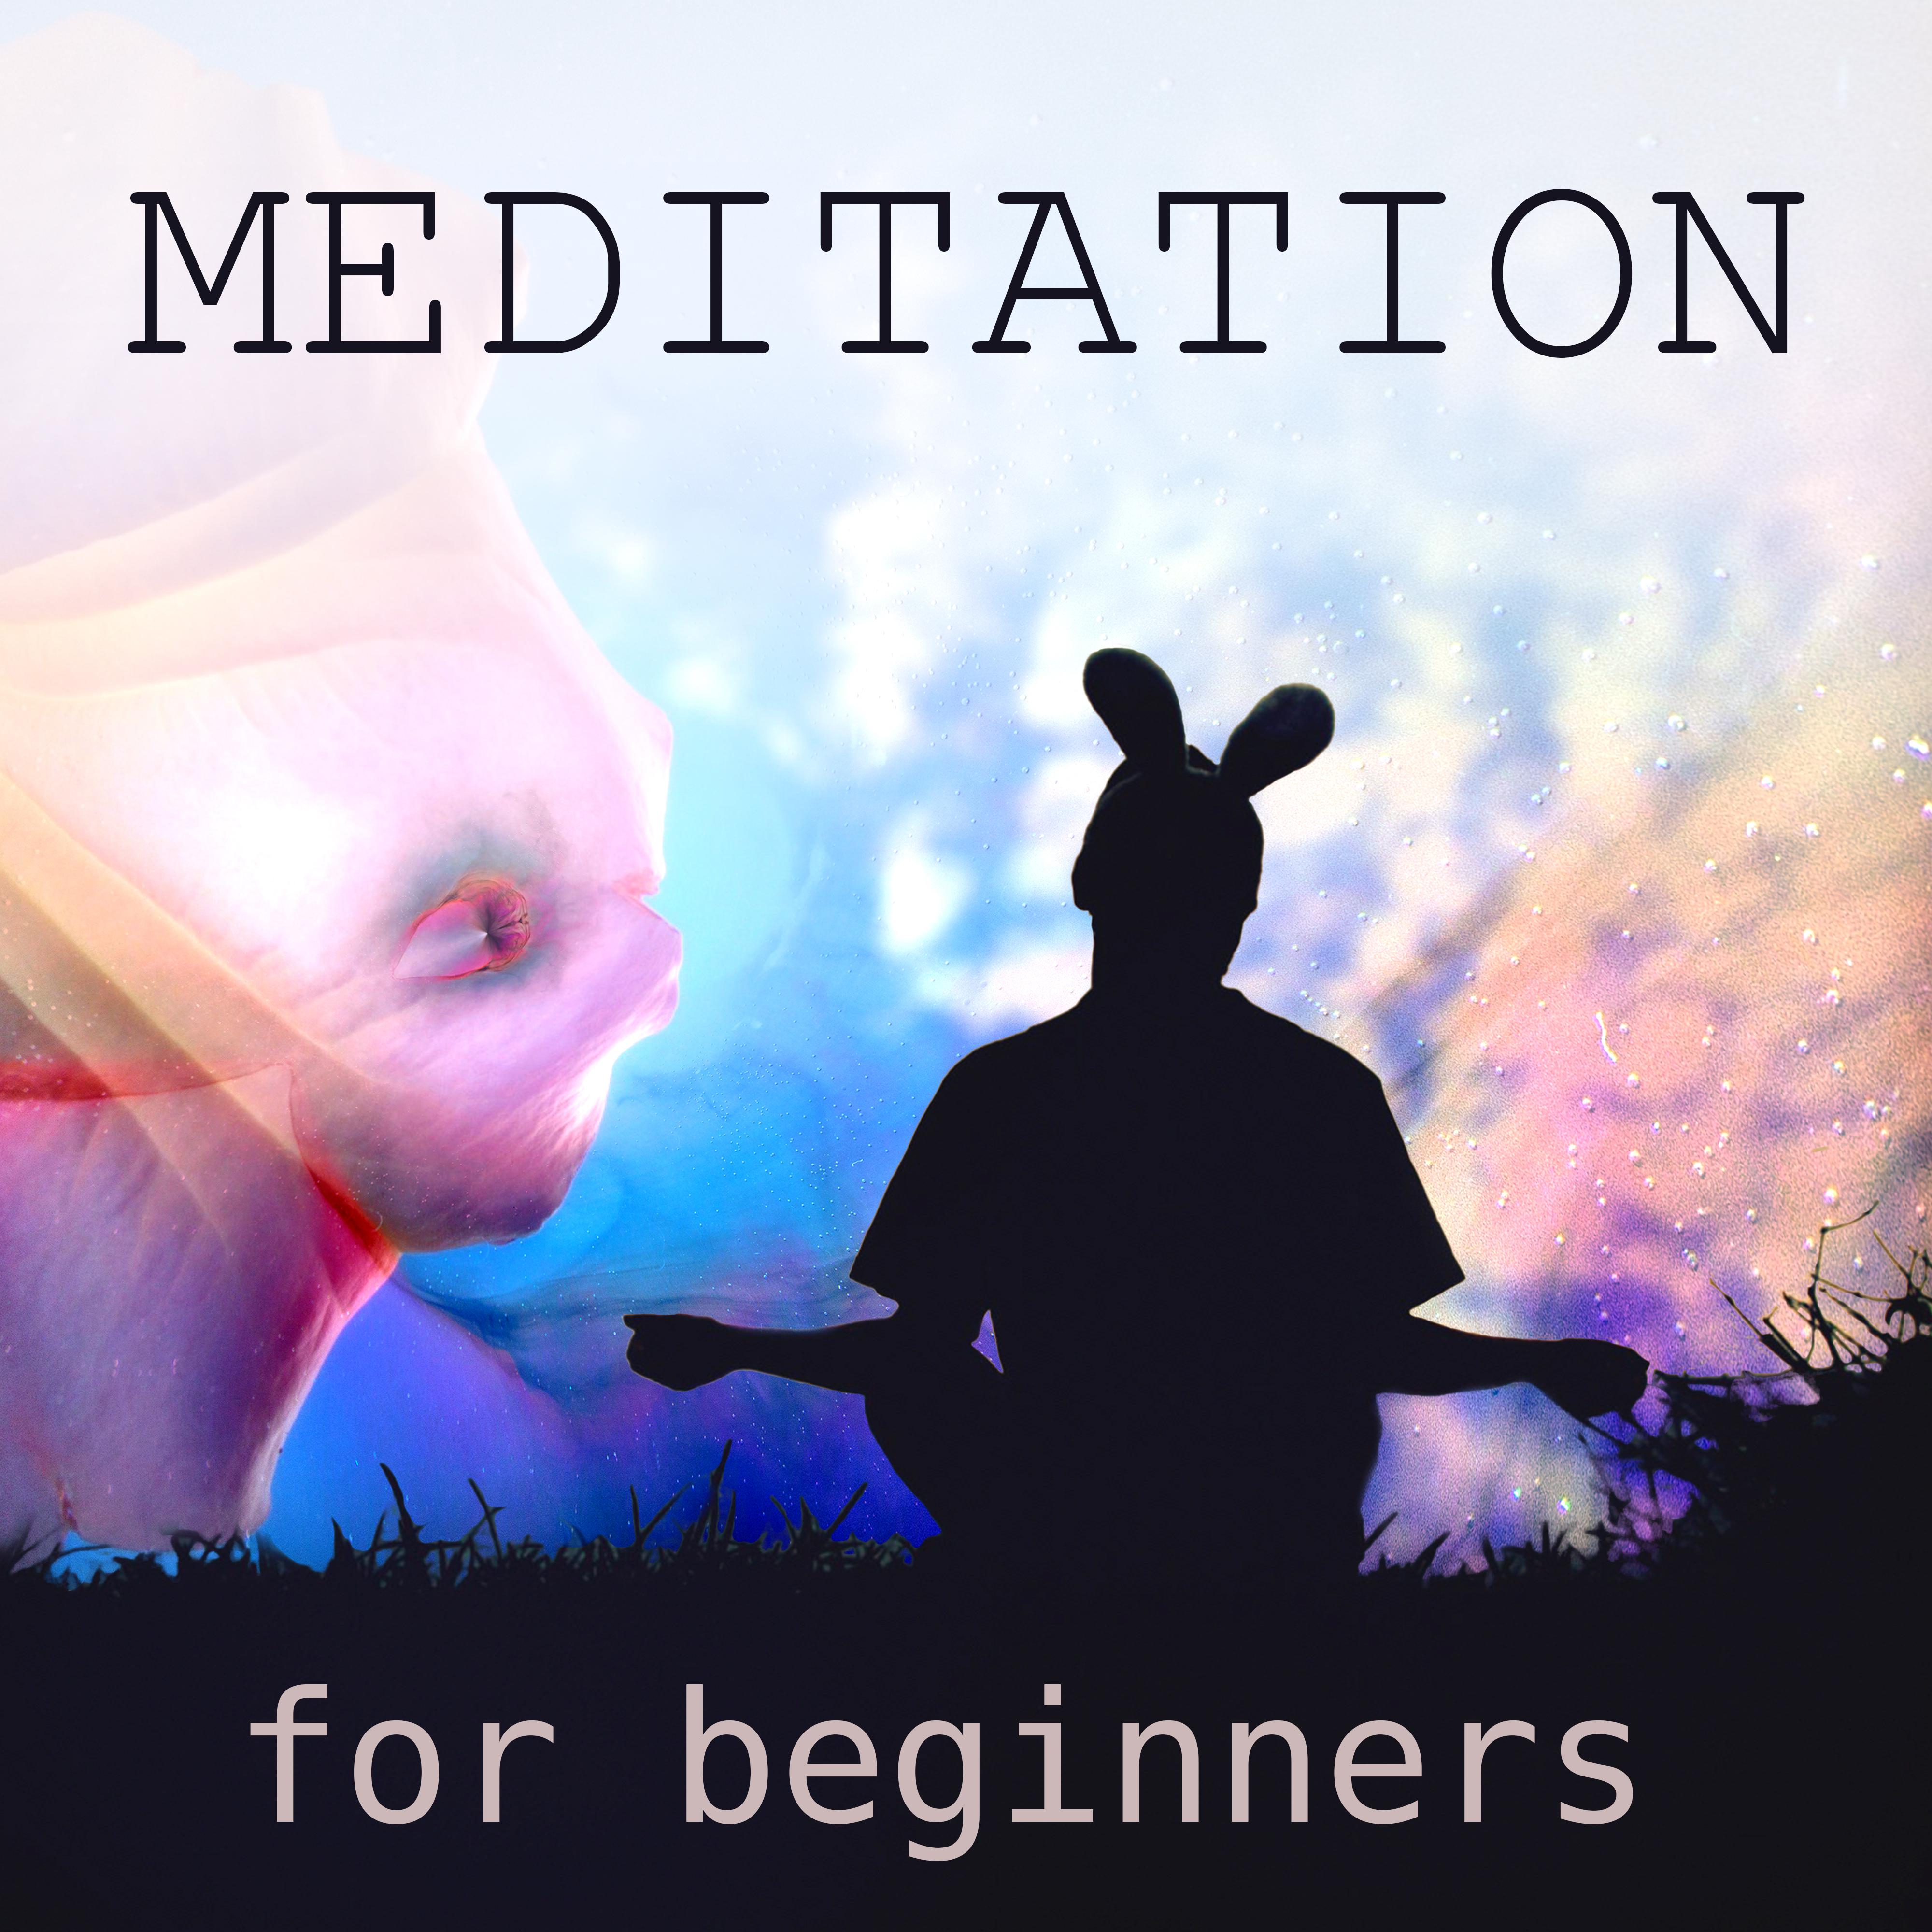 Meditation for Beginners - Peaceful Music with Nature Sounds, Meditation and Stress Relief, Sound Healing Meditation Music Therapy for Relaxation, Chakra Healing, First Steps Hypnosis